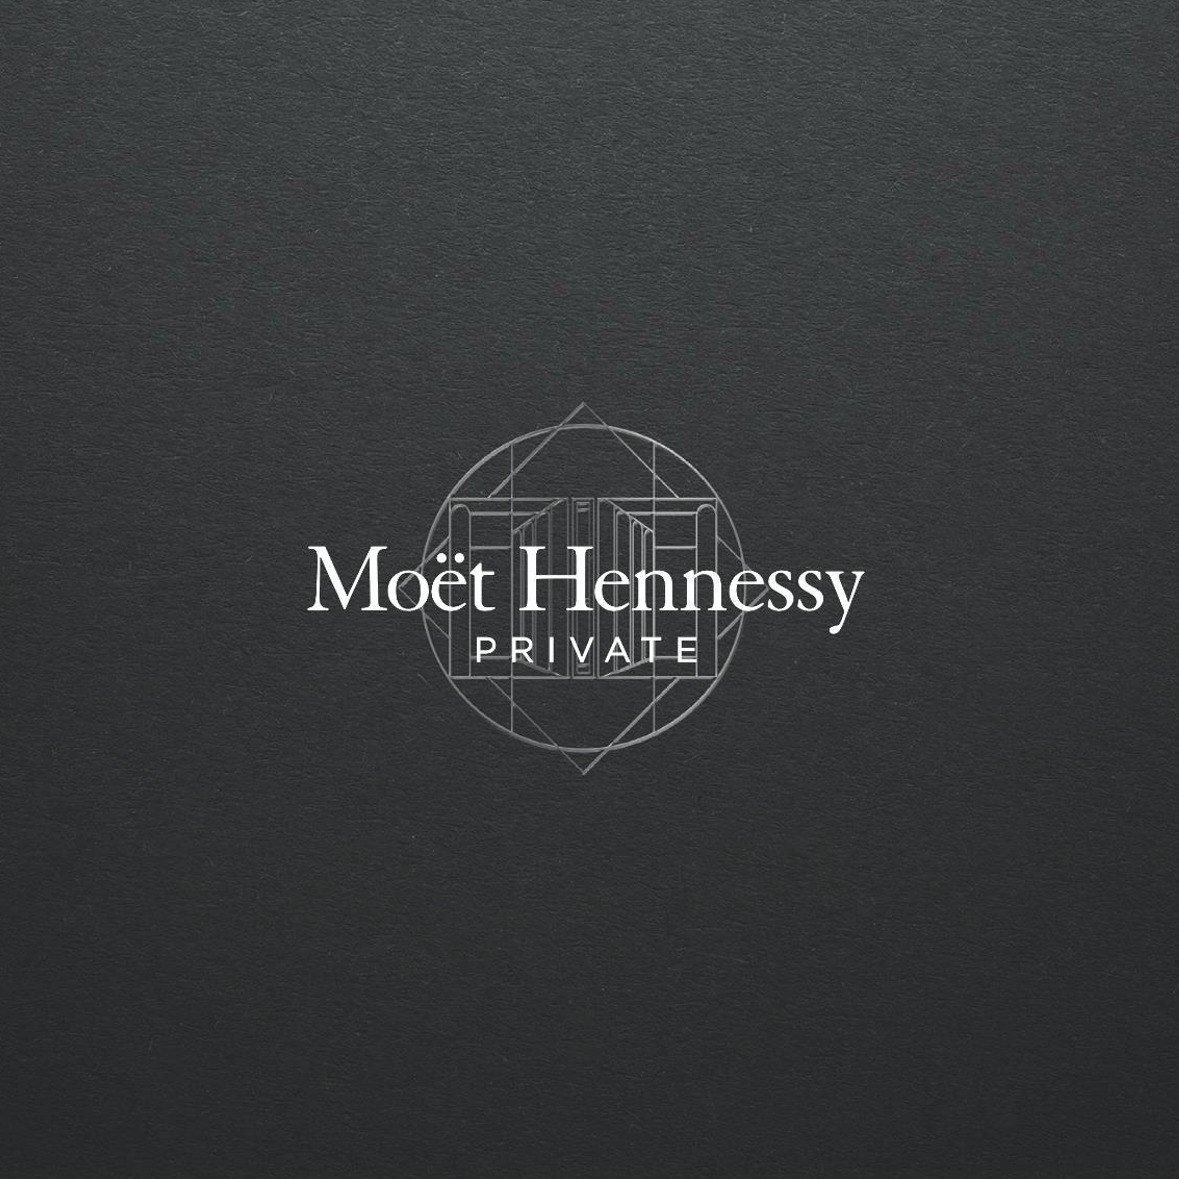 Moët Hennessy USA is tending to metaverse and NFTs